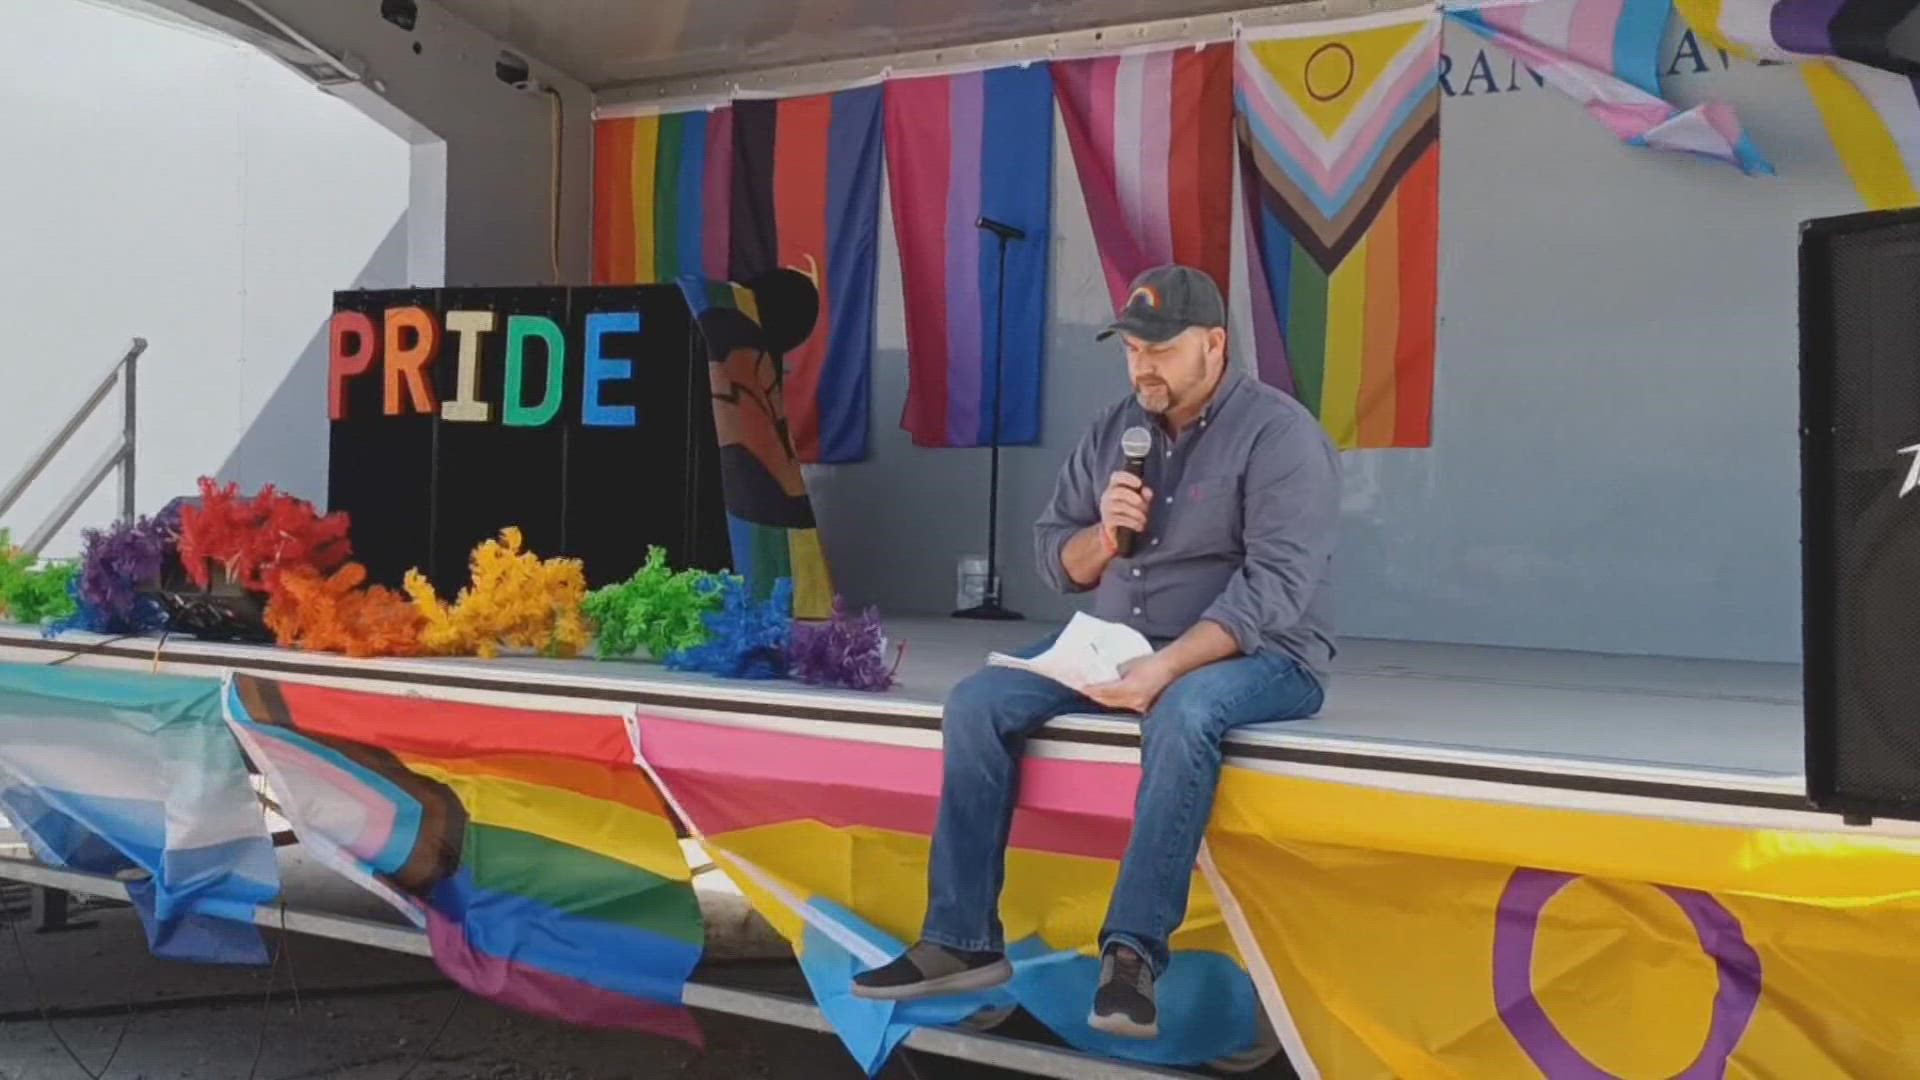 One of the highlights of the inaugural Muskegon Pride celebration involved local author Bob Switzer, who shared a journey of self-discovery decades in the making.